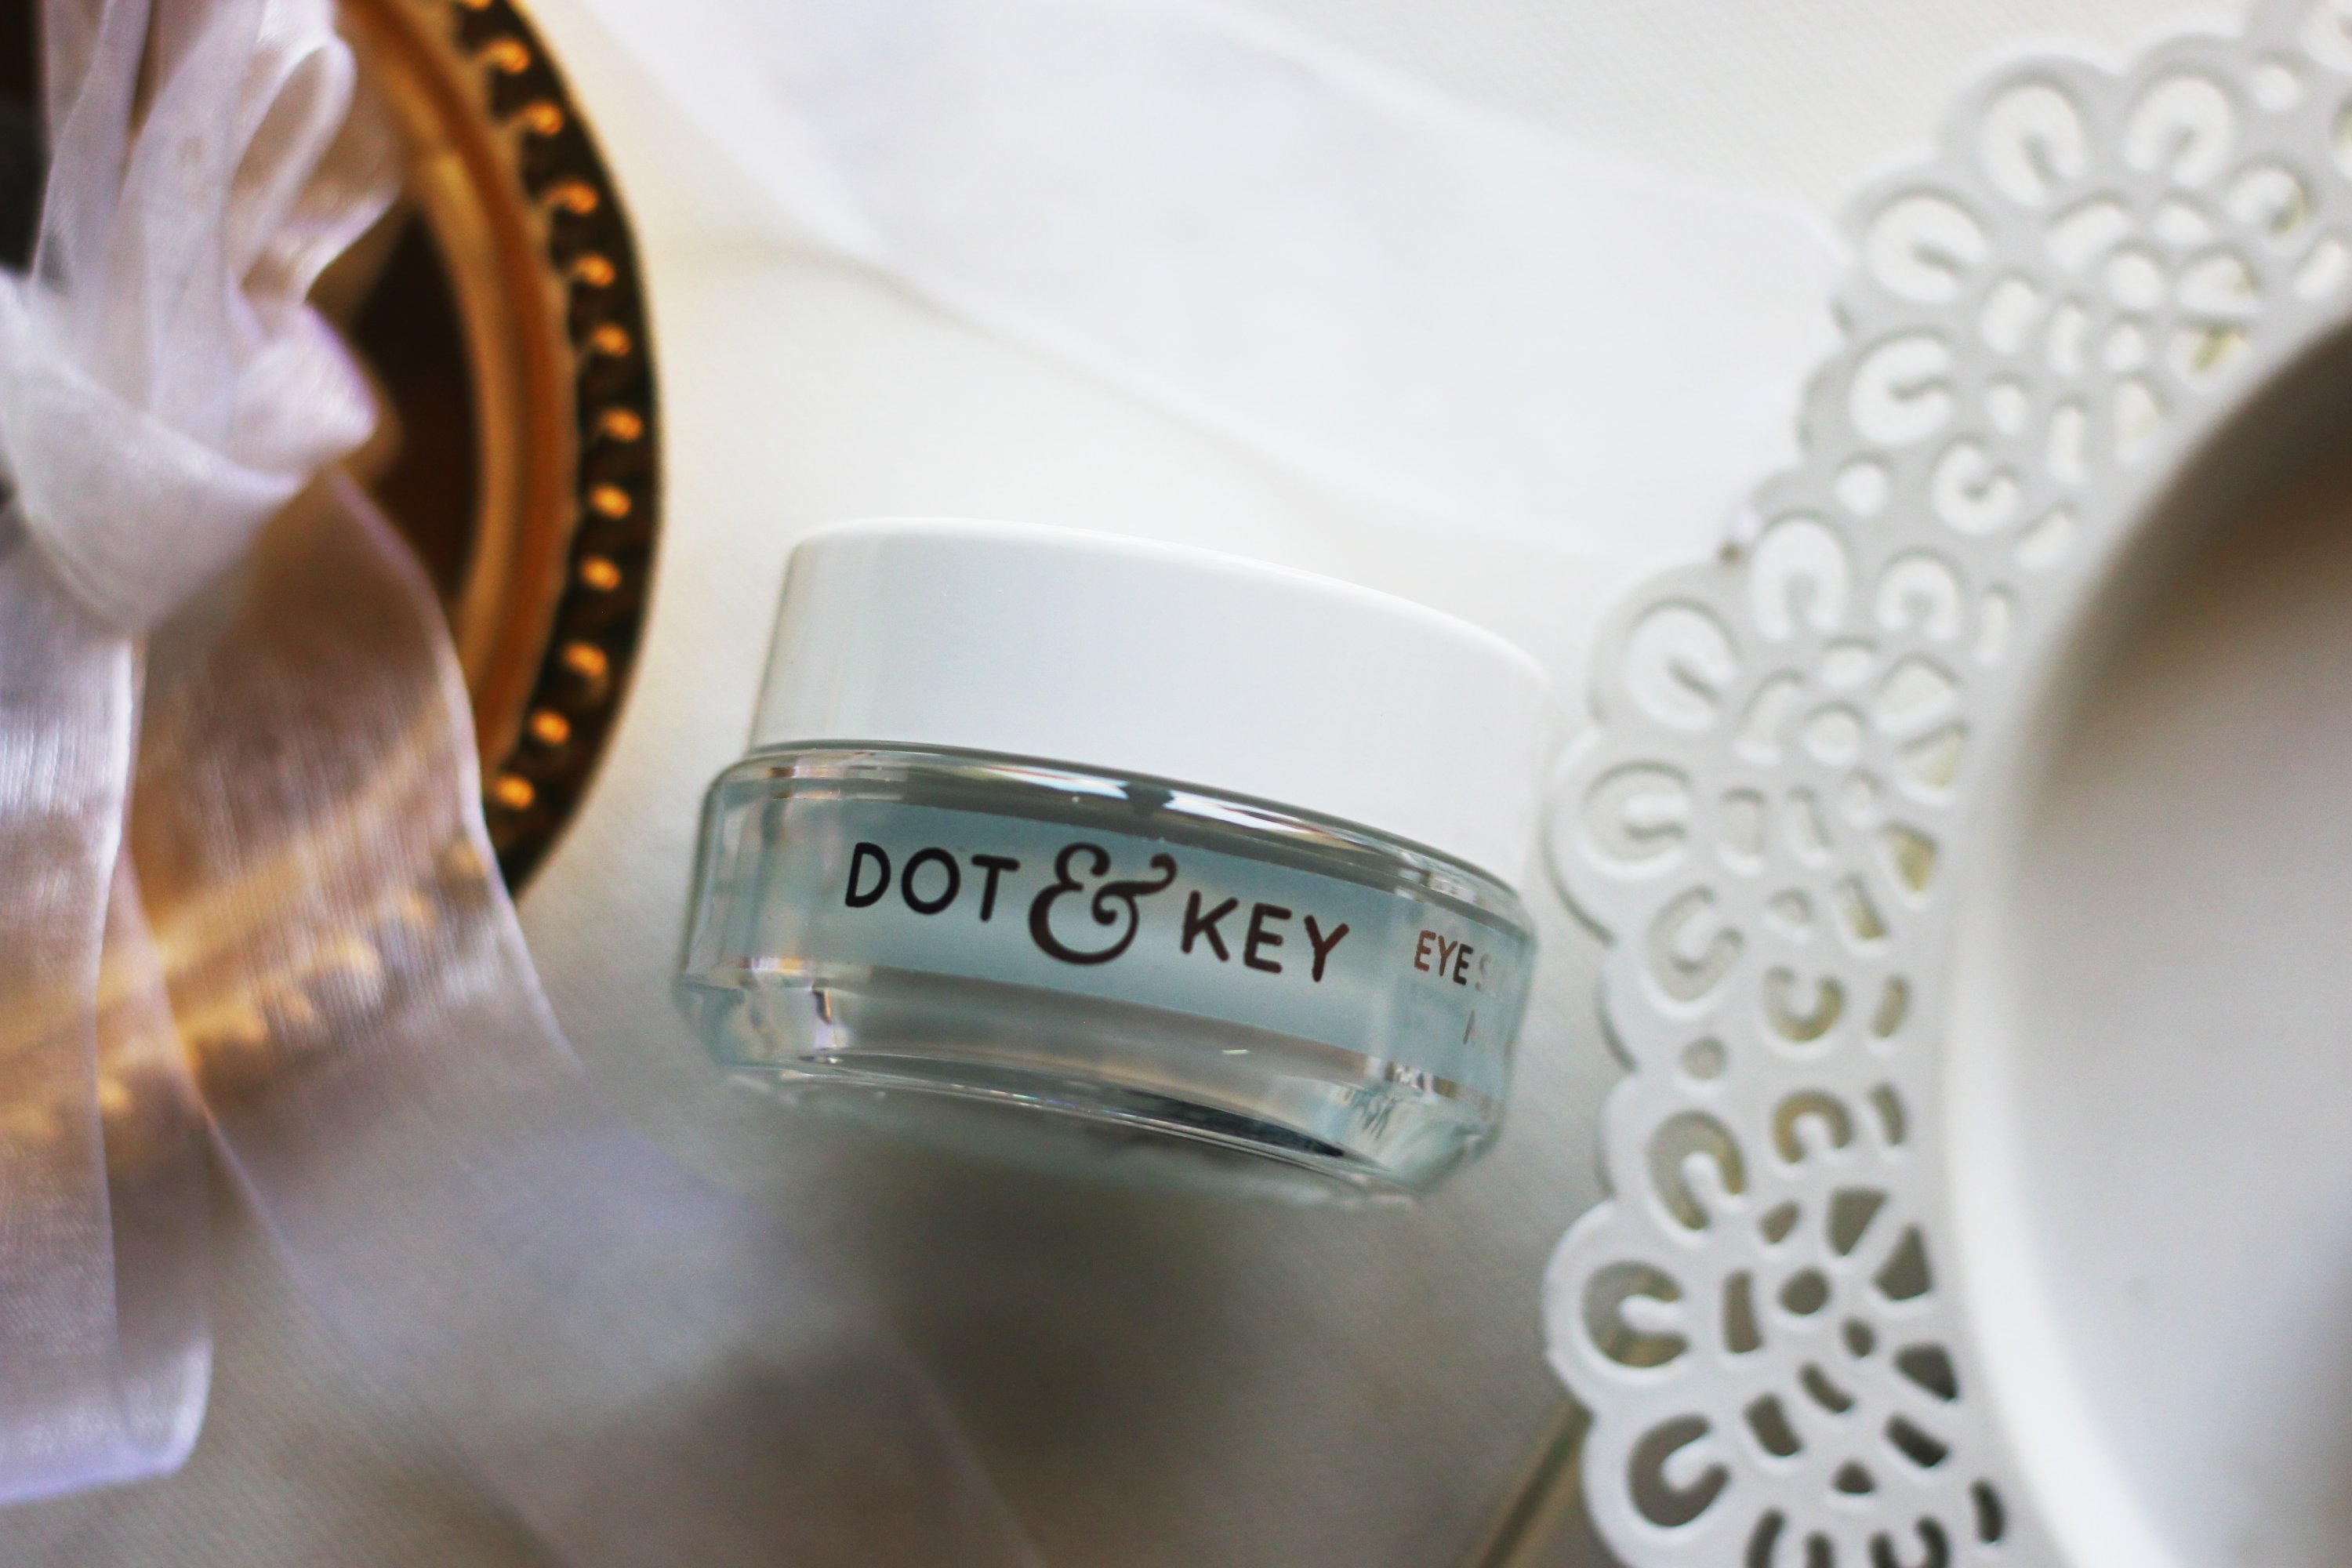 dot and key water drench hydrating hyaluronic serum concentrate review, dot and key skincare, dot & key anti ageing skincare, dot and key face serums, dot and key hyaluronic acid serum, when to start retinol in your skincare routine, choosing right anti-ageing products,dot and key skincare products, how to choose right products for skin, night skincare serum , best ctm routine products, ctm routine for acne prone skin, skincare for pores, skincare products for anti ageing, dot and key eye cream review, dot and key eye sleeping mask, dot and key sleeping mask, dot and key overnight mask, dot and key face mask, dot & key skin plumping moisture infusion water sleeping mask review,depuffing eye cream concentrate review,  eye cream, under eye cream, dark circles, puffy eyes, antioxidant rich eye cream, depuffing eye cream, illuminating eye cream, eye cream for dark circles, eye cream for puffy eyes, plump under eye, hydrated under eye,  overnight eye mask, eye puffiness mask, dark circles removal mask, eye bags, gel texture eye mask, cooling eye mask, line minimizing eye mask, dot and key shadow minimizing eye sleeping mask review, cooling mask, hyaluronic mask, hydration face mask, best overnight sleeping mask,  serum for glowing skin, facial serum, glow serum, dry skin serum   